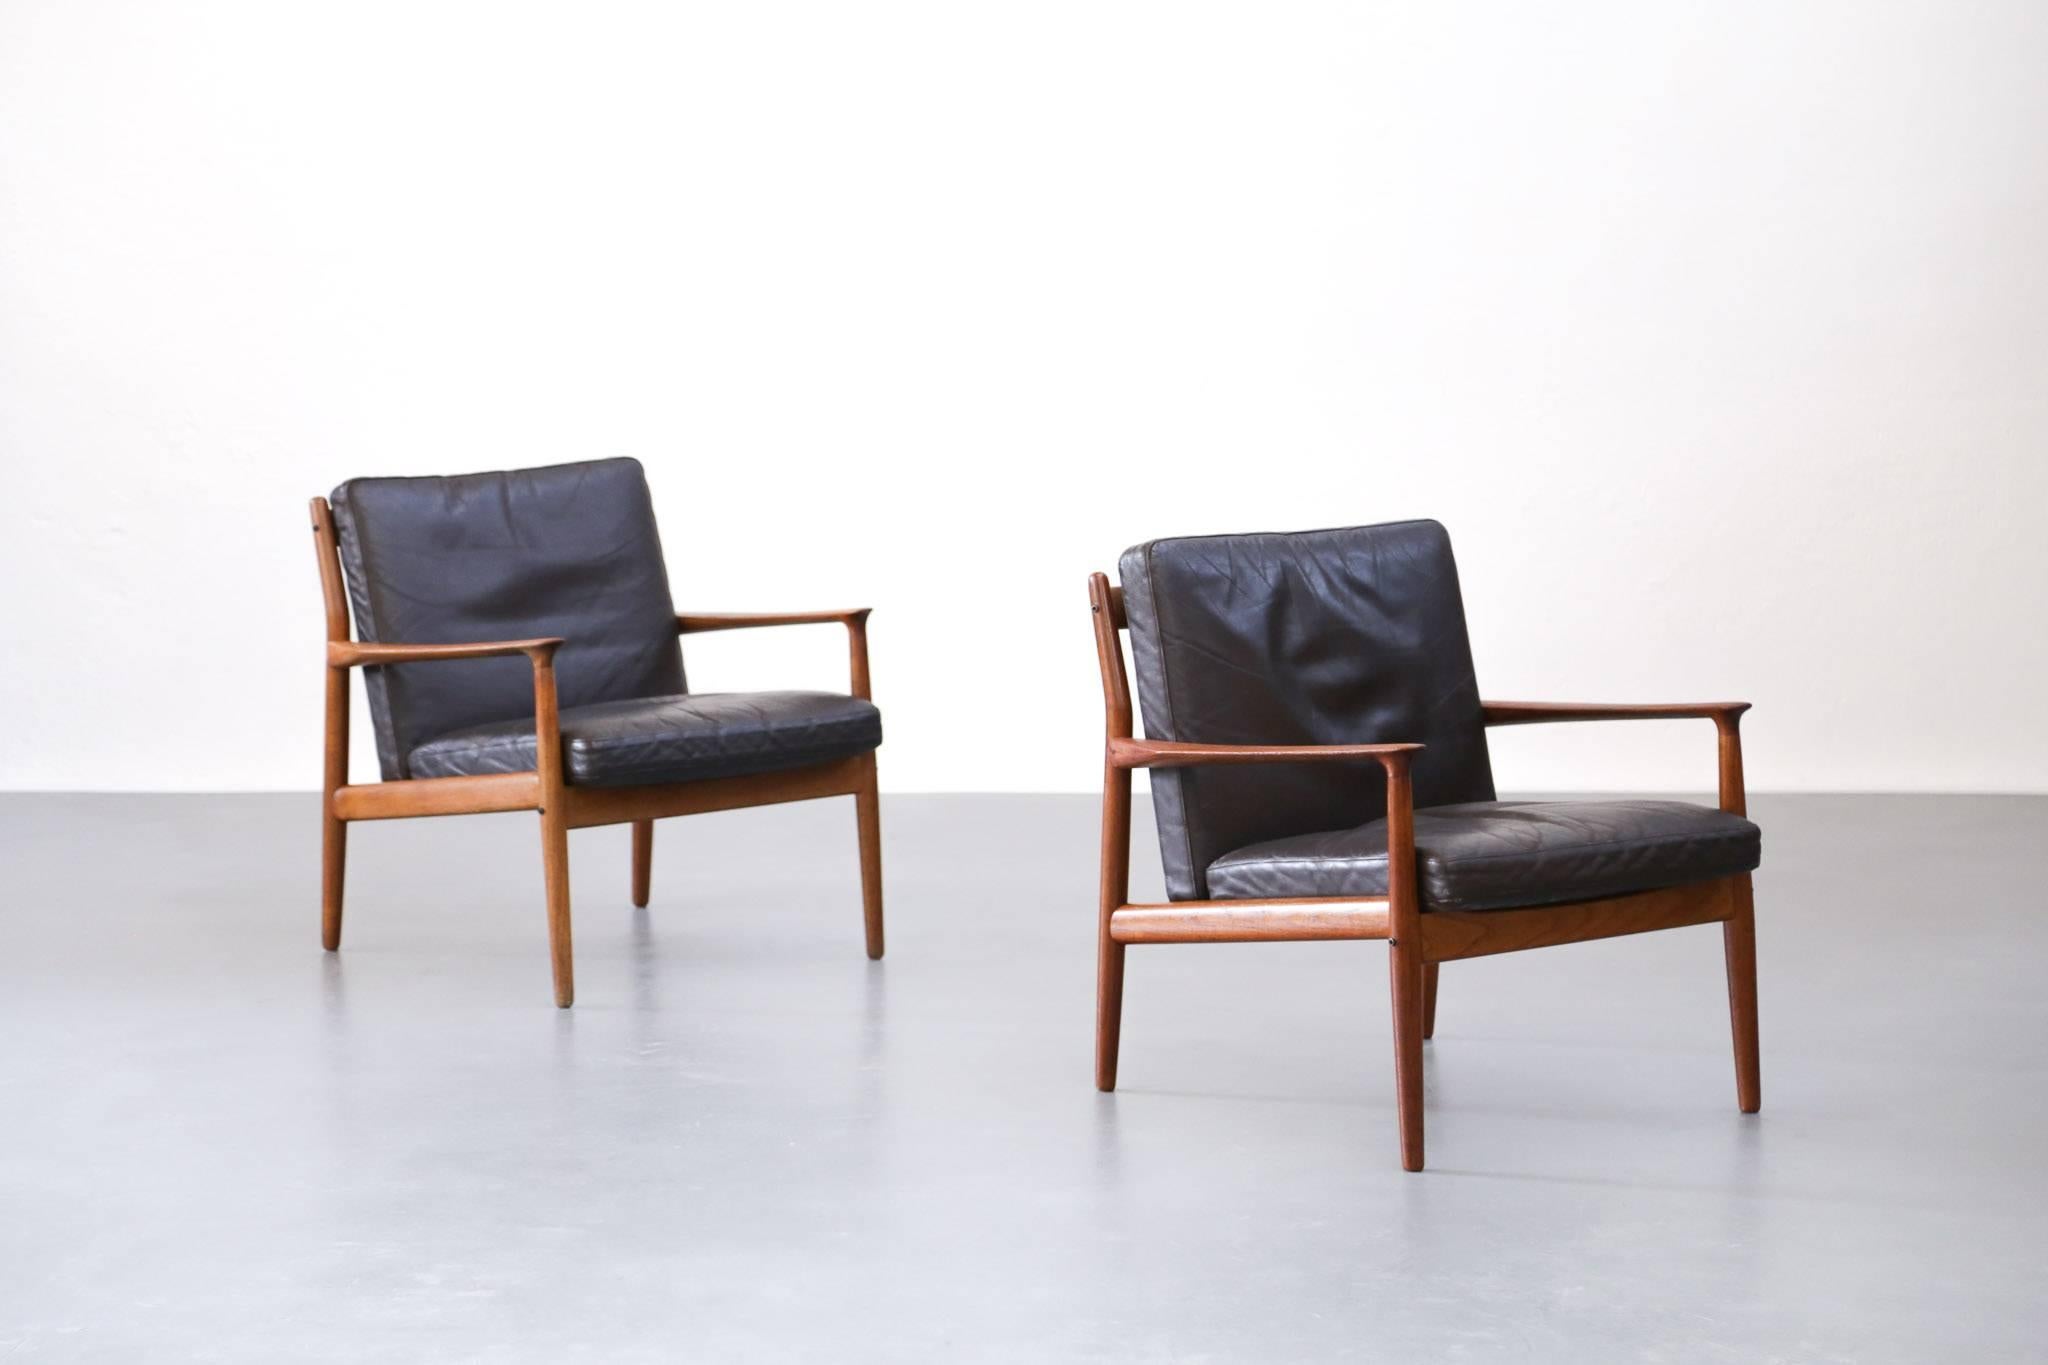 Scandinavian armchairs by Grete Jalk
Frame made of teak, with leather cushions.